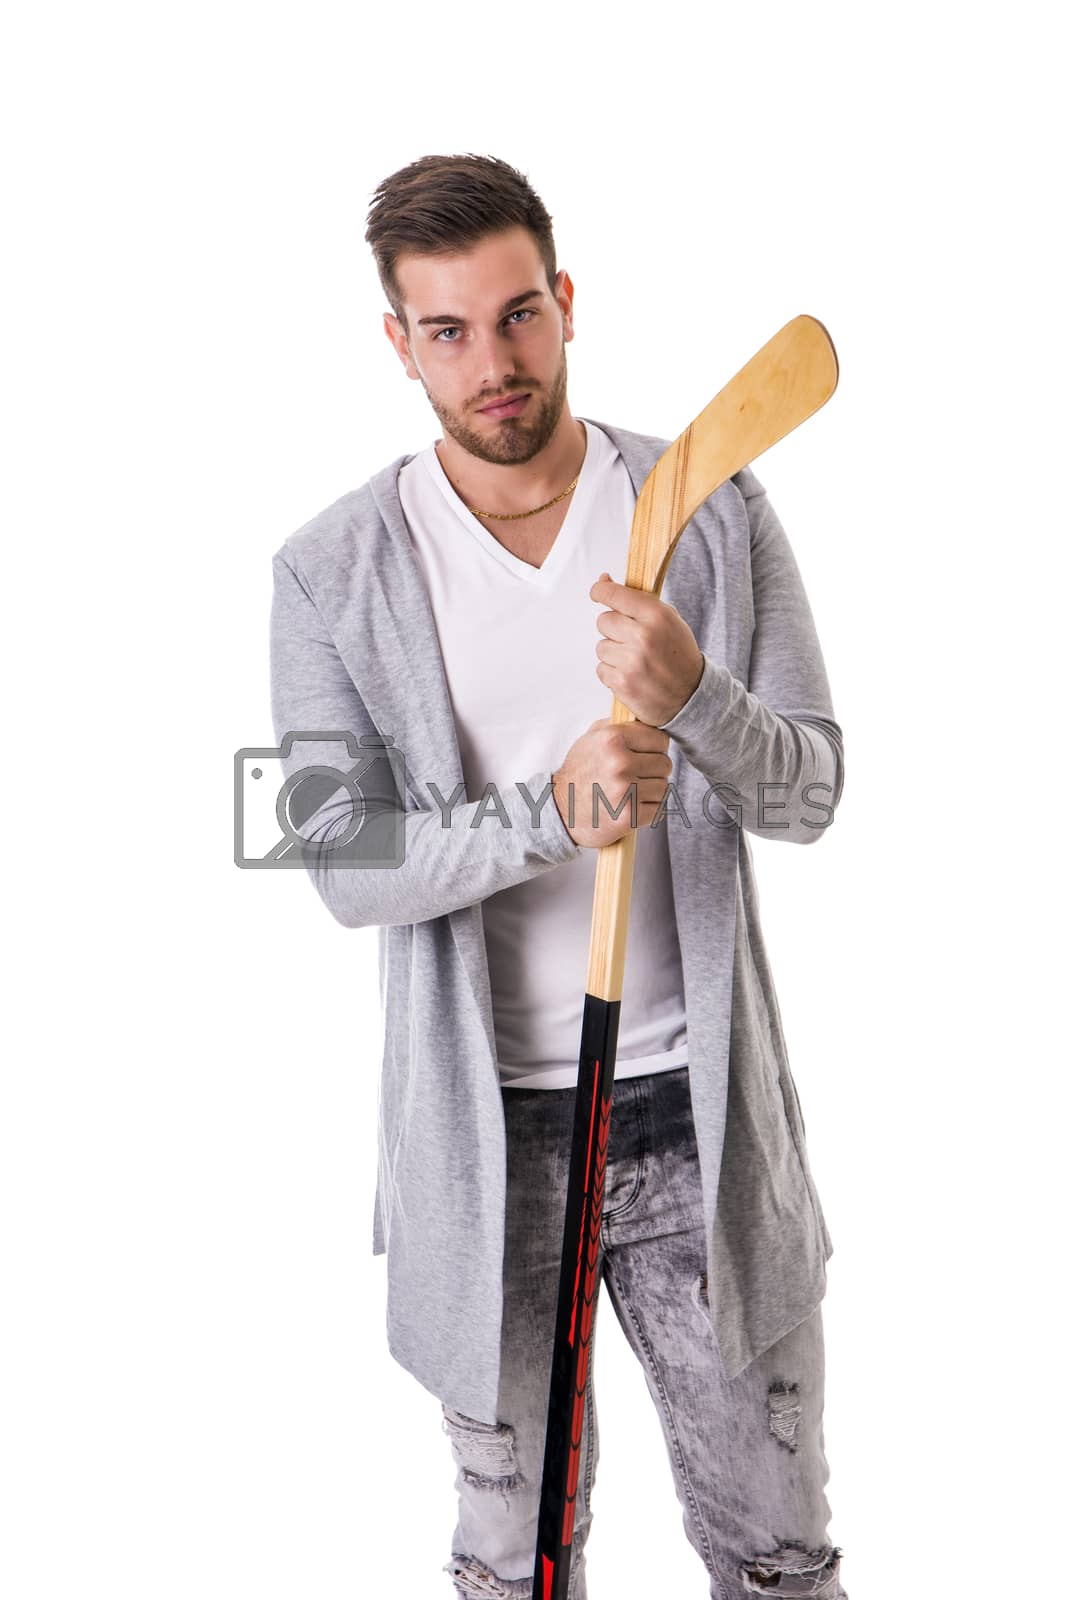 Royalty free image of Handsome man with a hockey stick by artofphoto